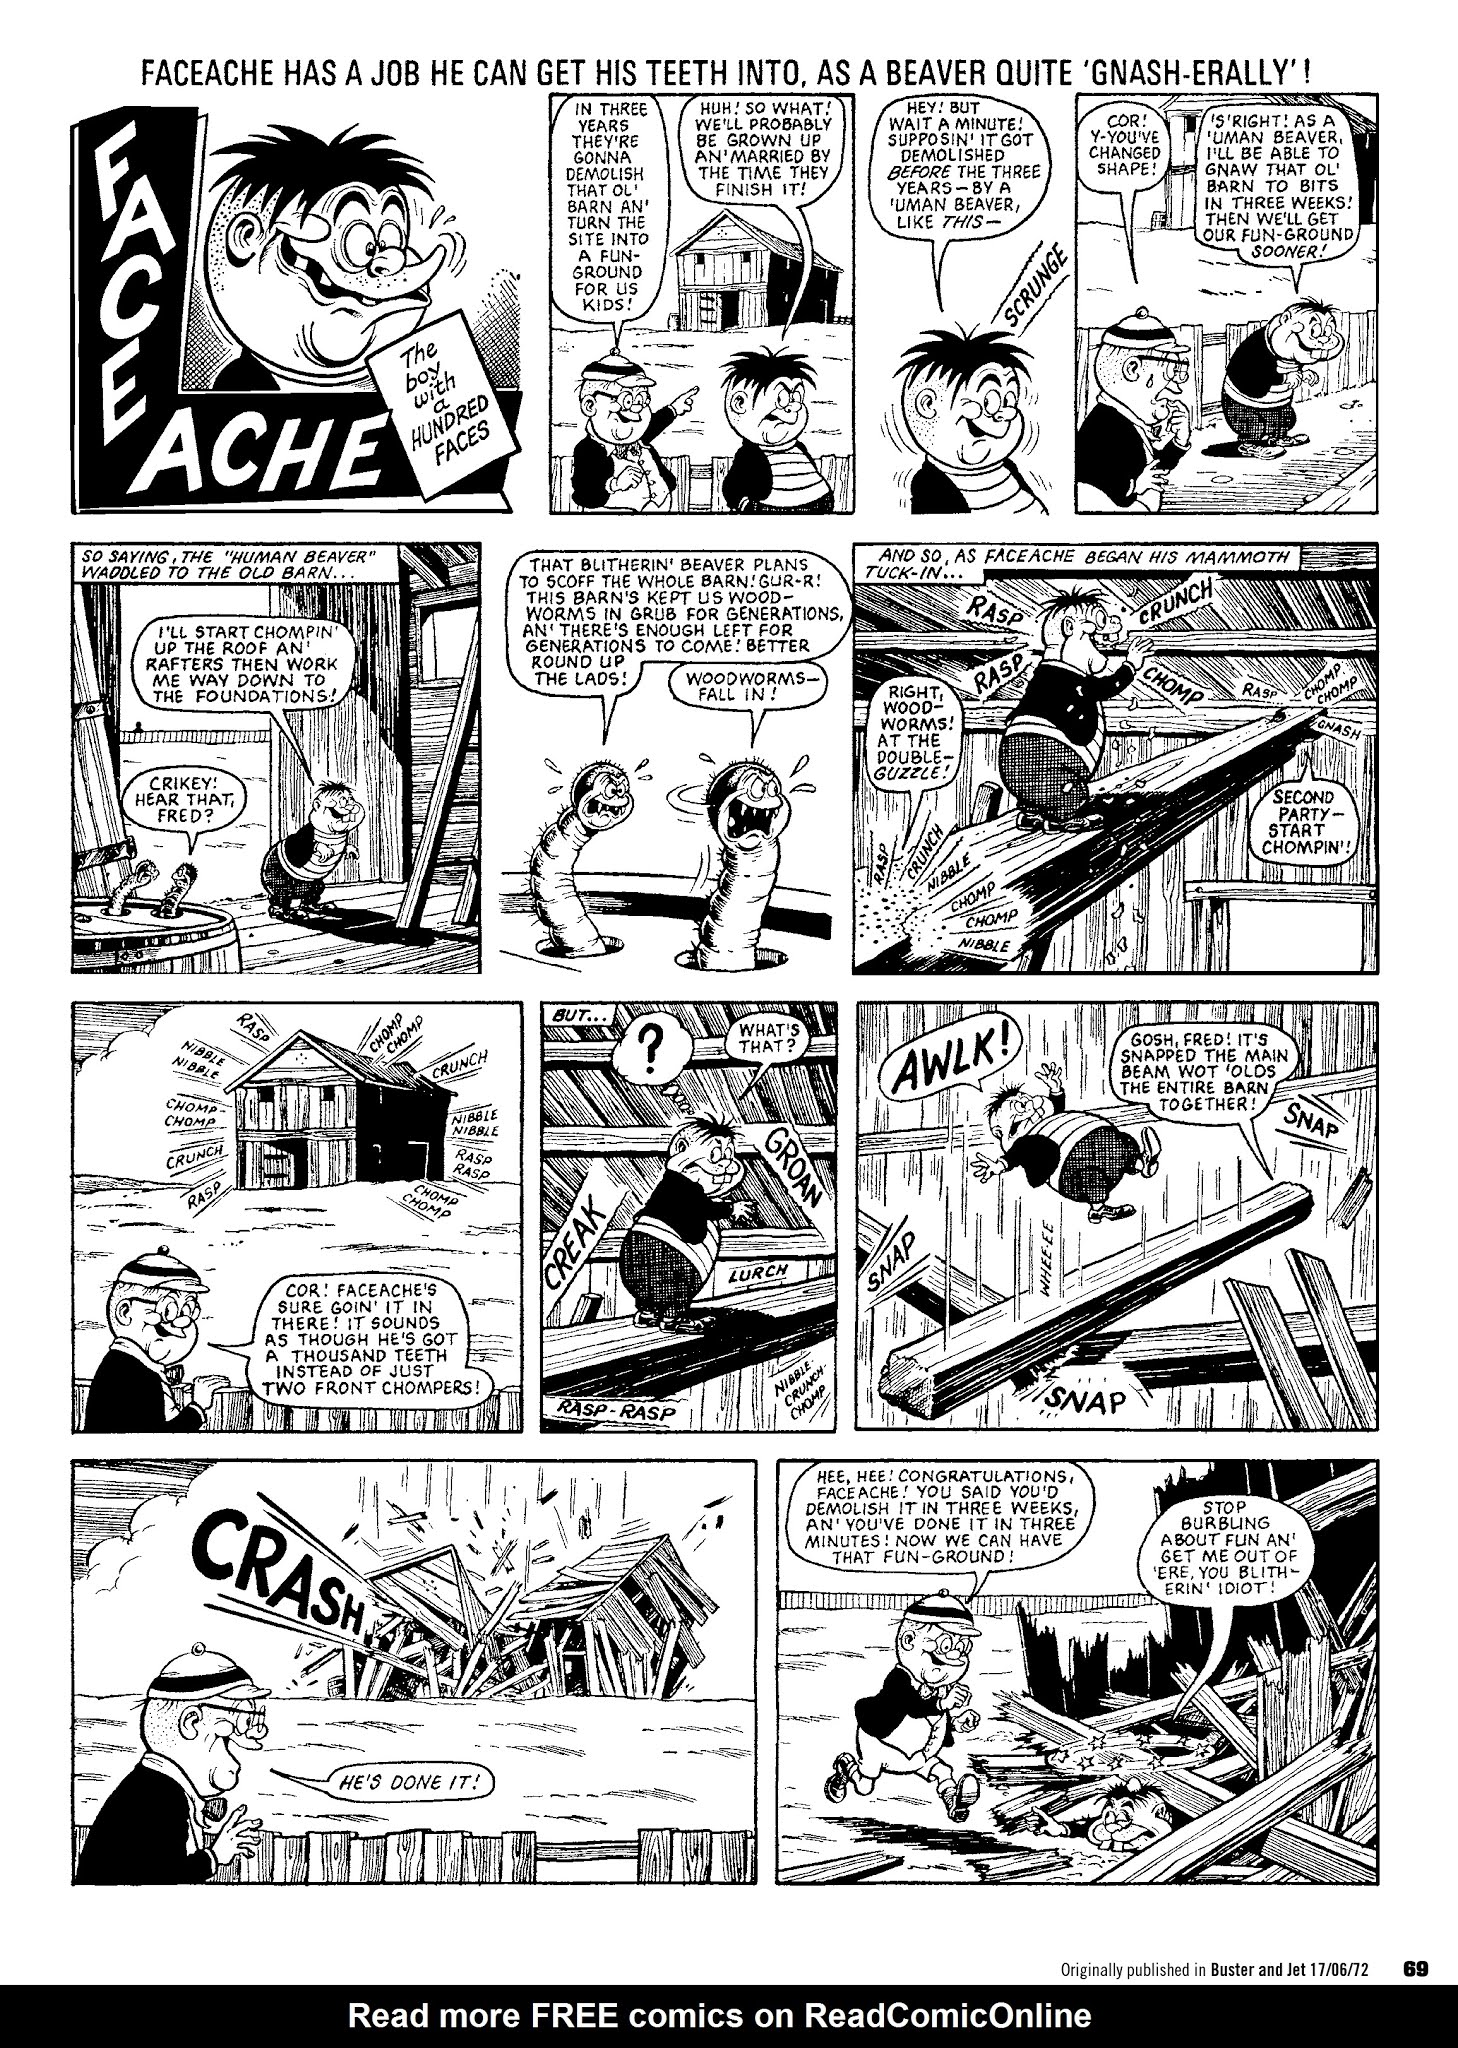 Read online Faceache: The First Hundred Scrunges comic -  Issue # TPB 1 - 71